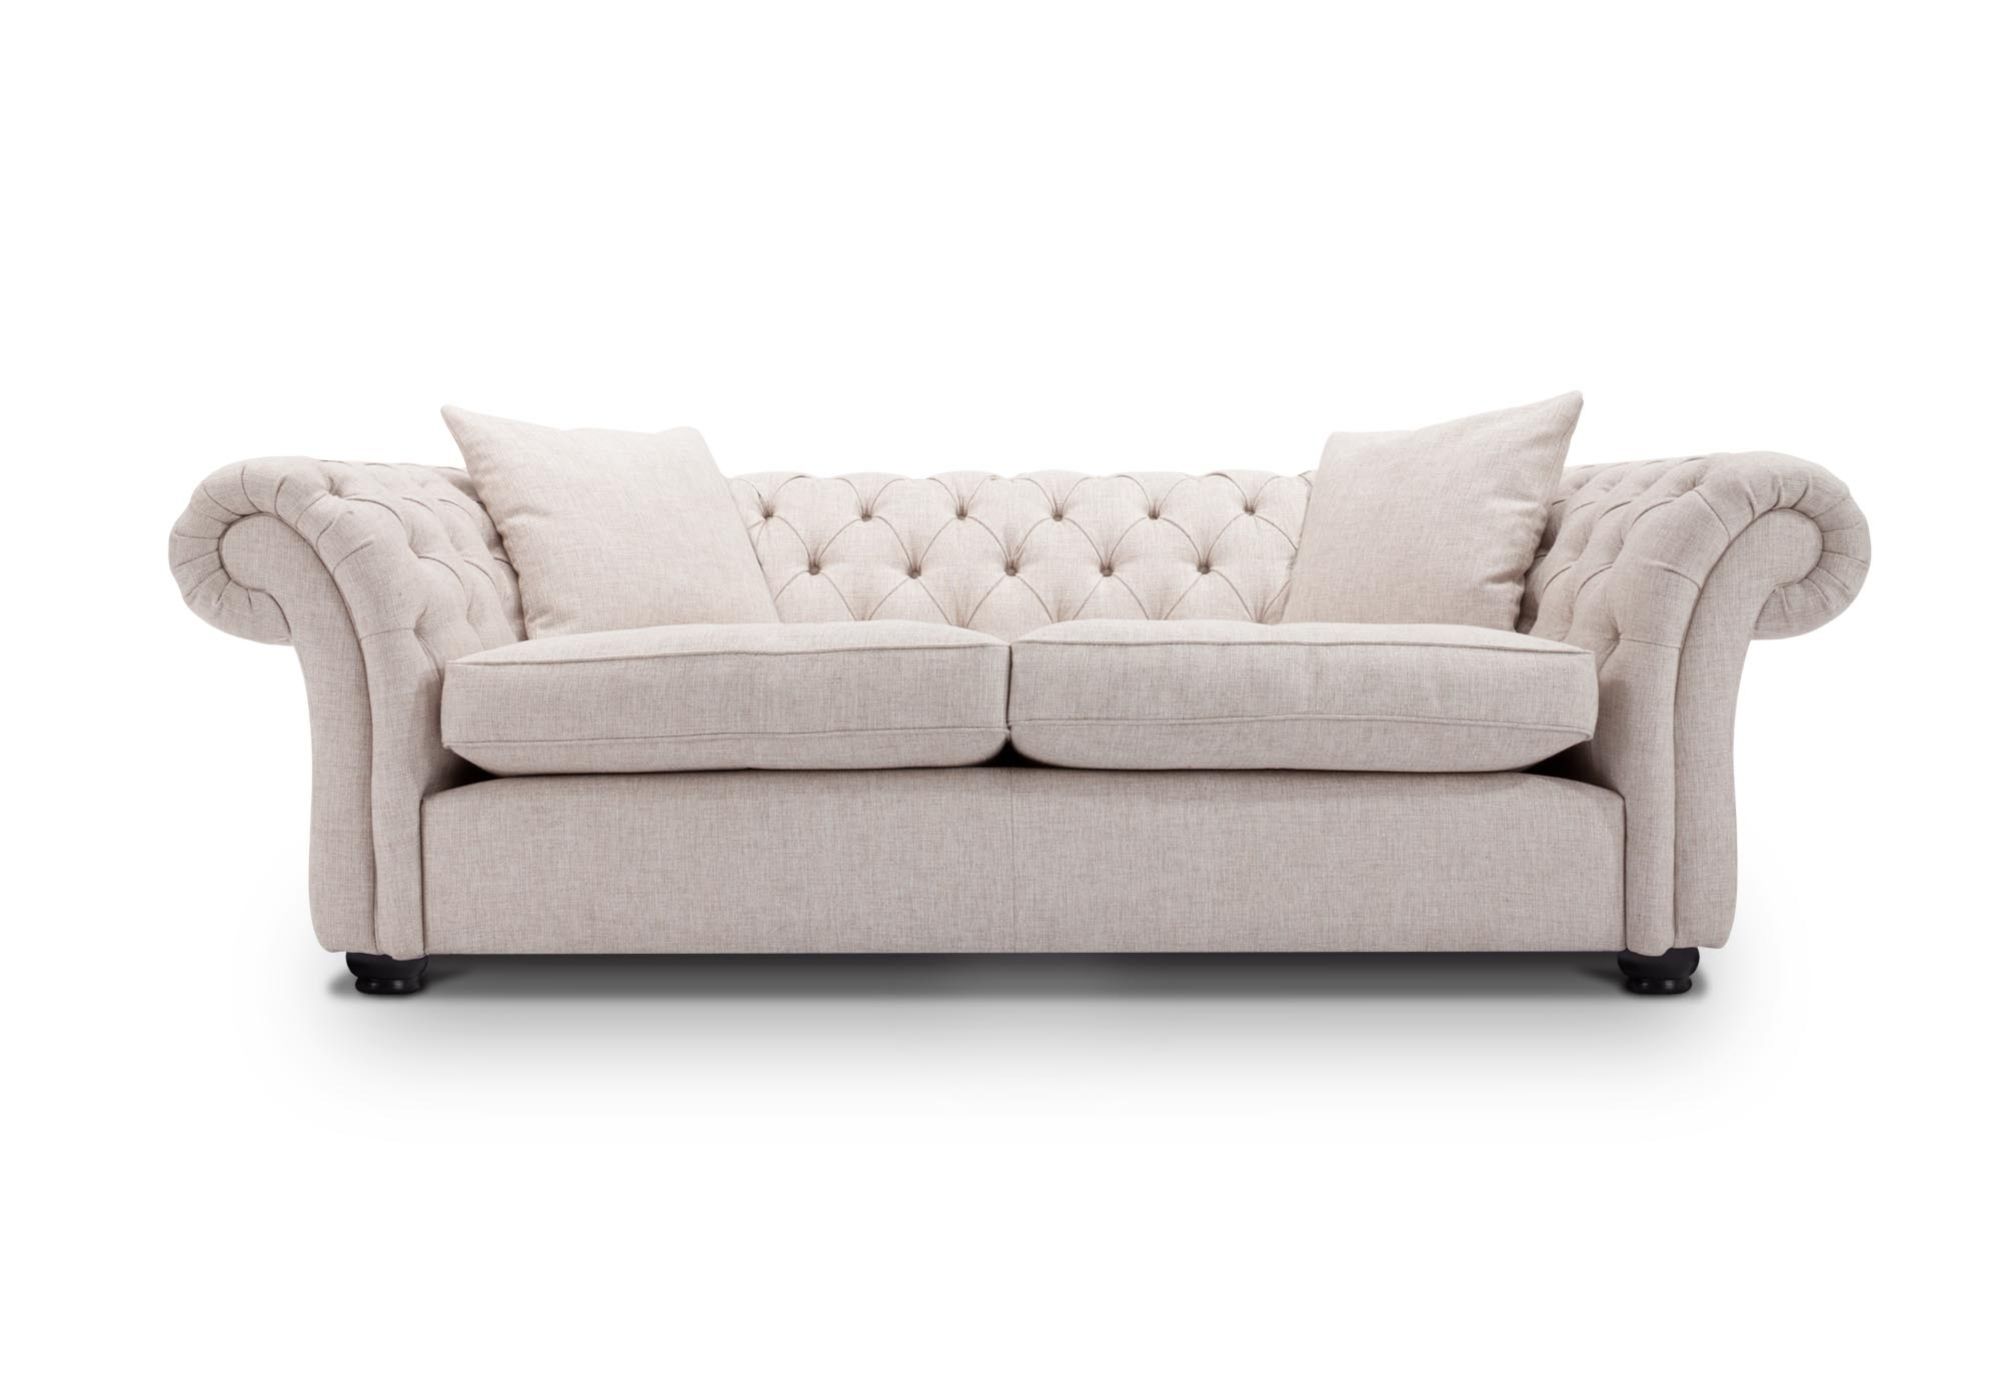 Chesterfield Style Sofa Bed Hereo Sofa With Small Chesterfield Sofas (View 5 of 15)